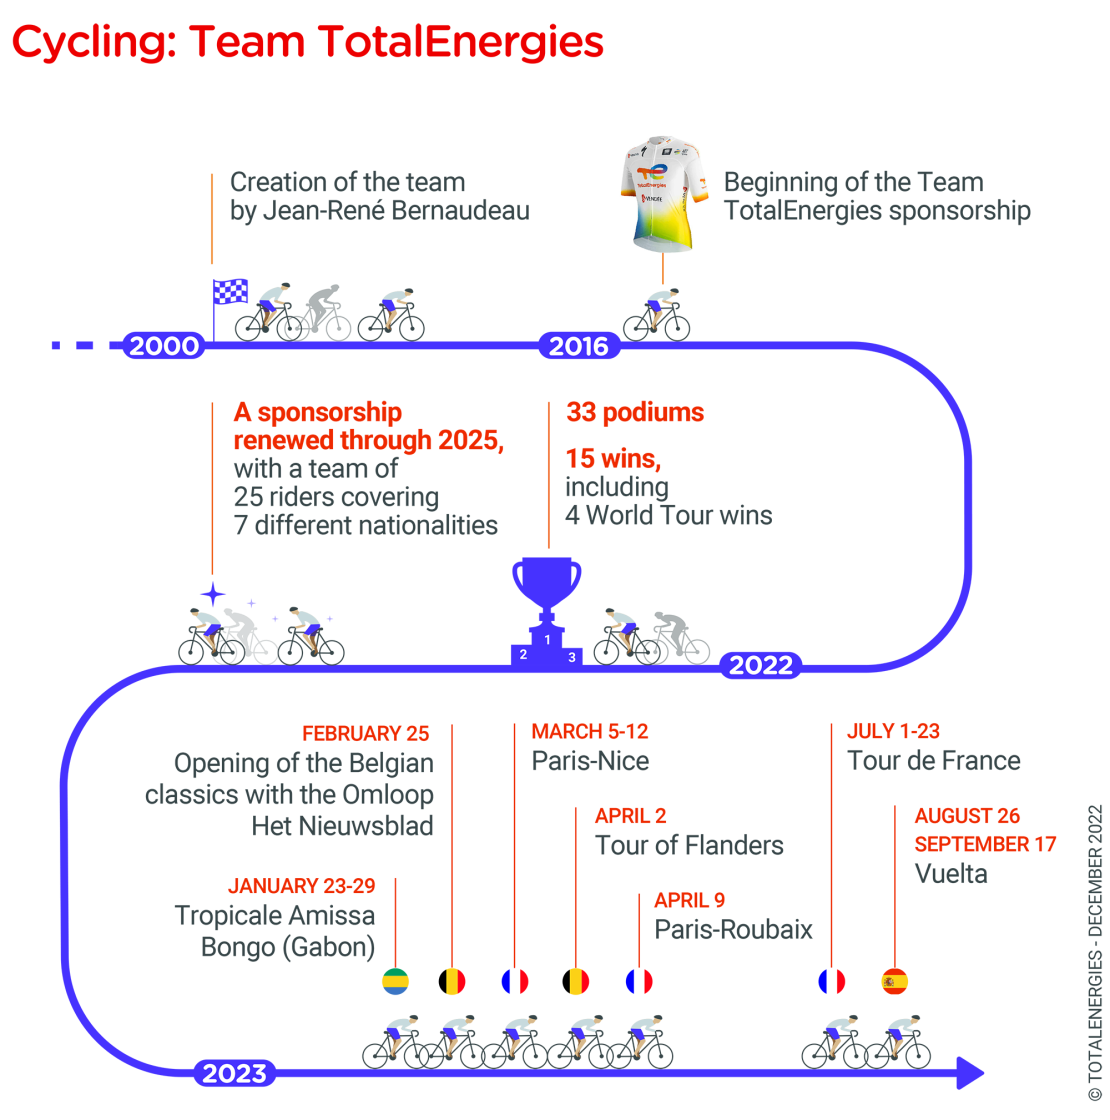 "Cycling: Team TotalEnergies" infographics - see description above